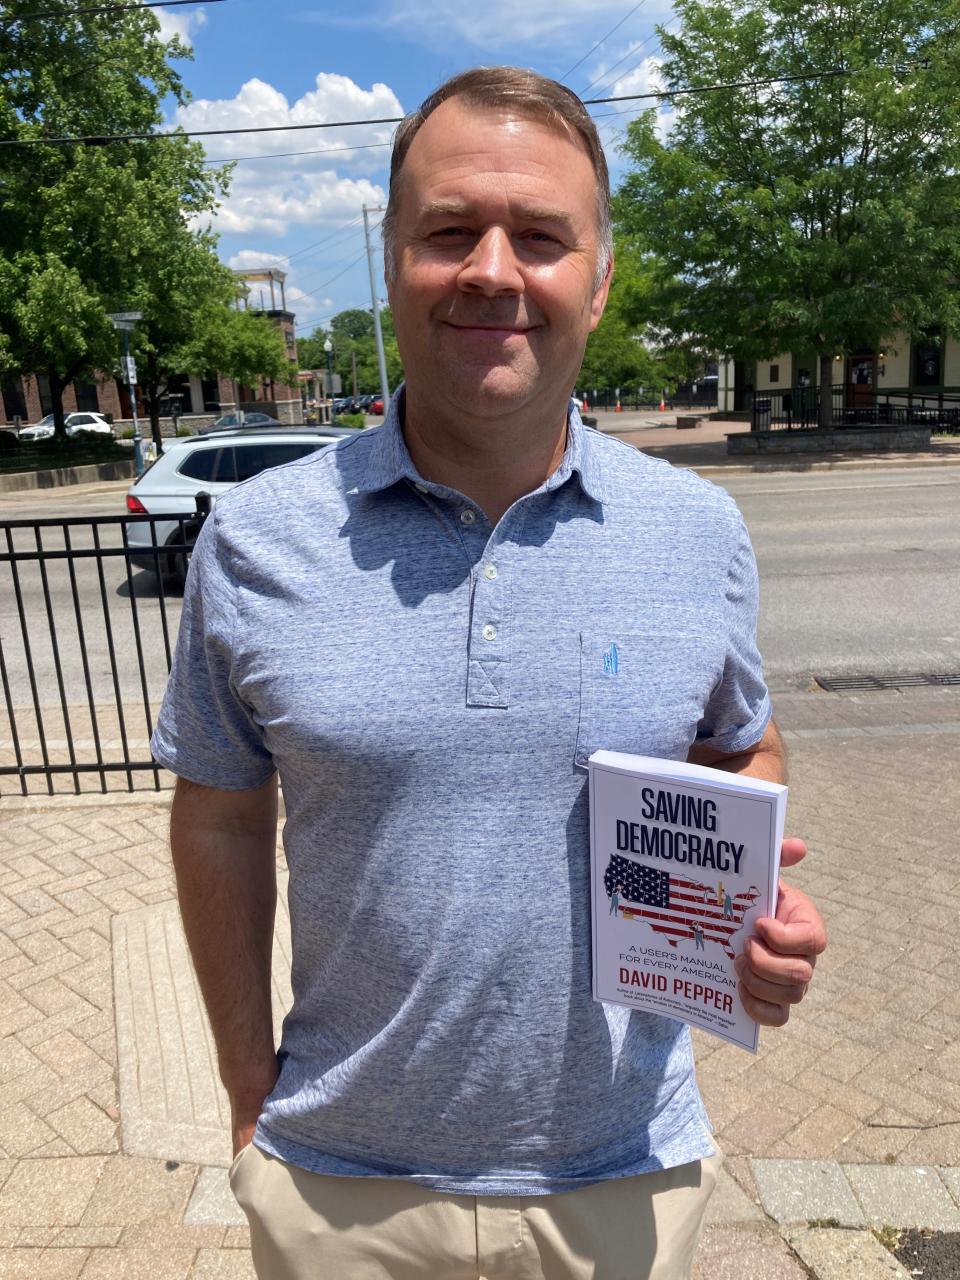 Former Ohio Democratic Party chairman David Pepper has written a new book: "Saving Democracy: A User’s Manual for Every American."